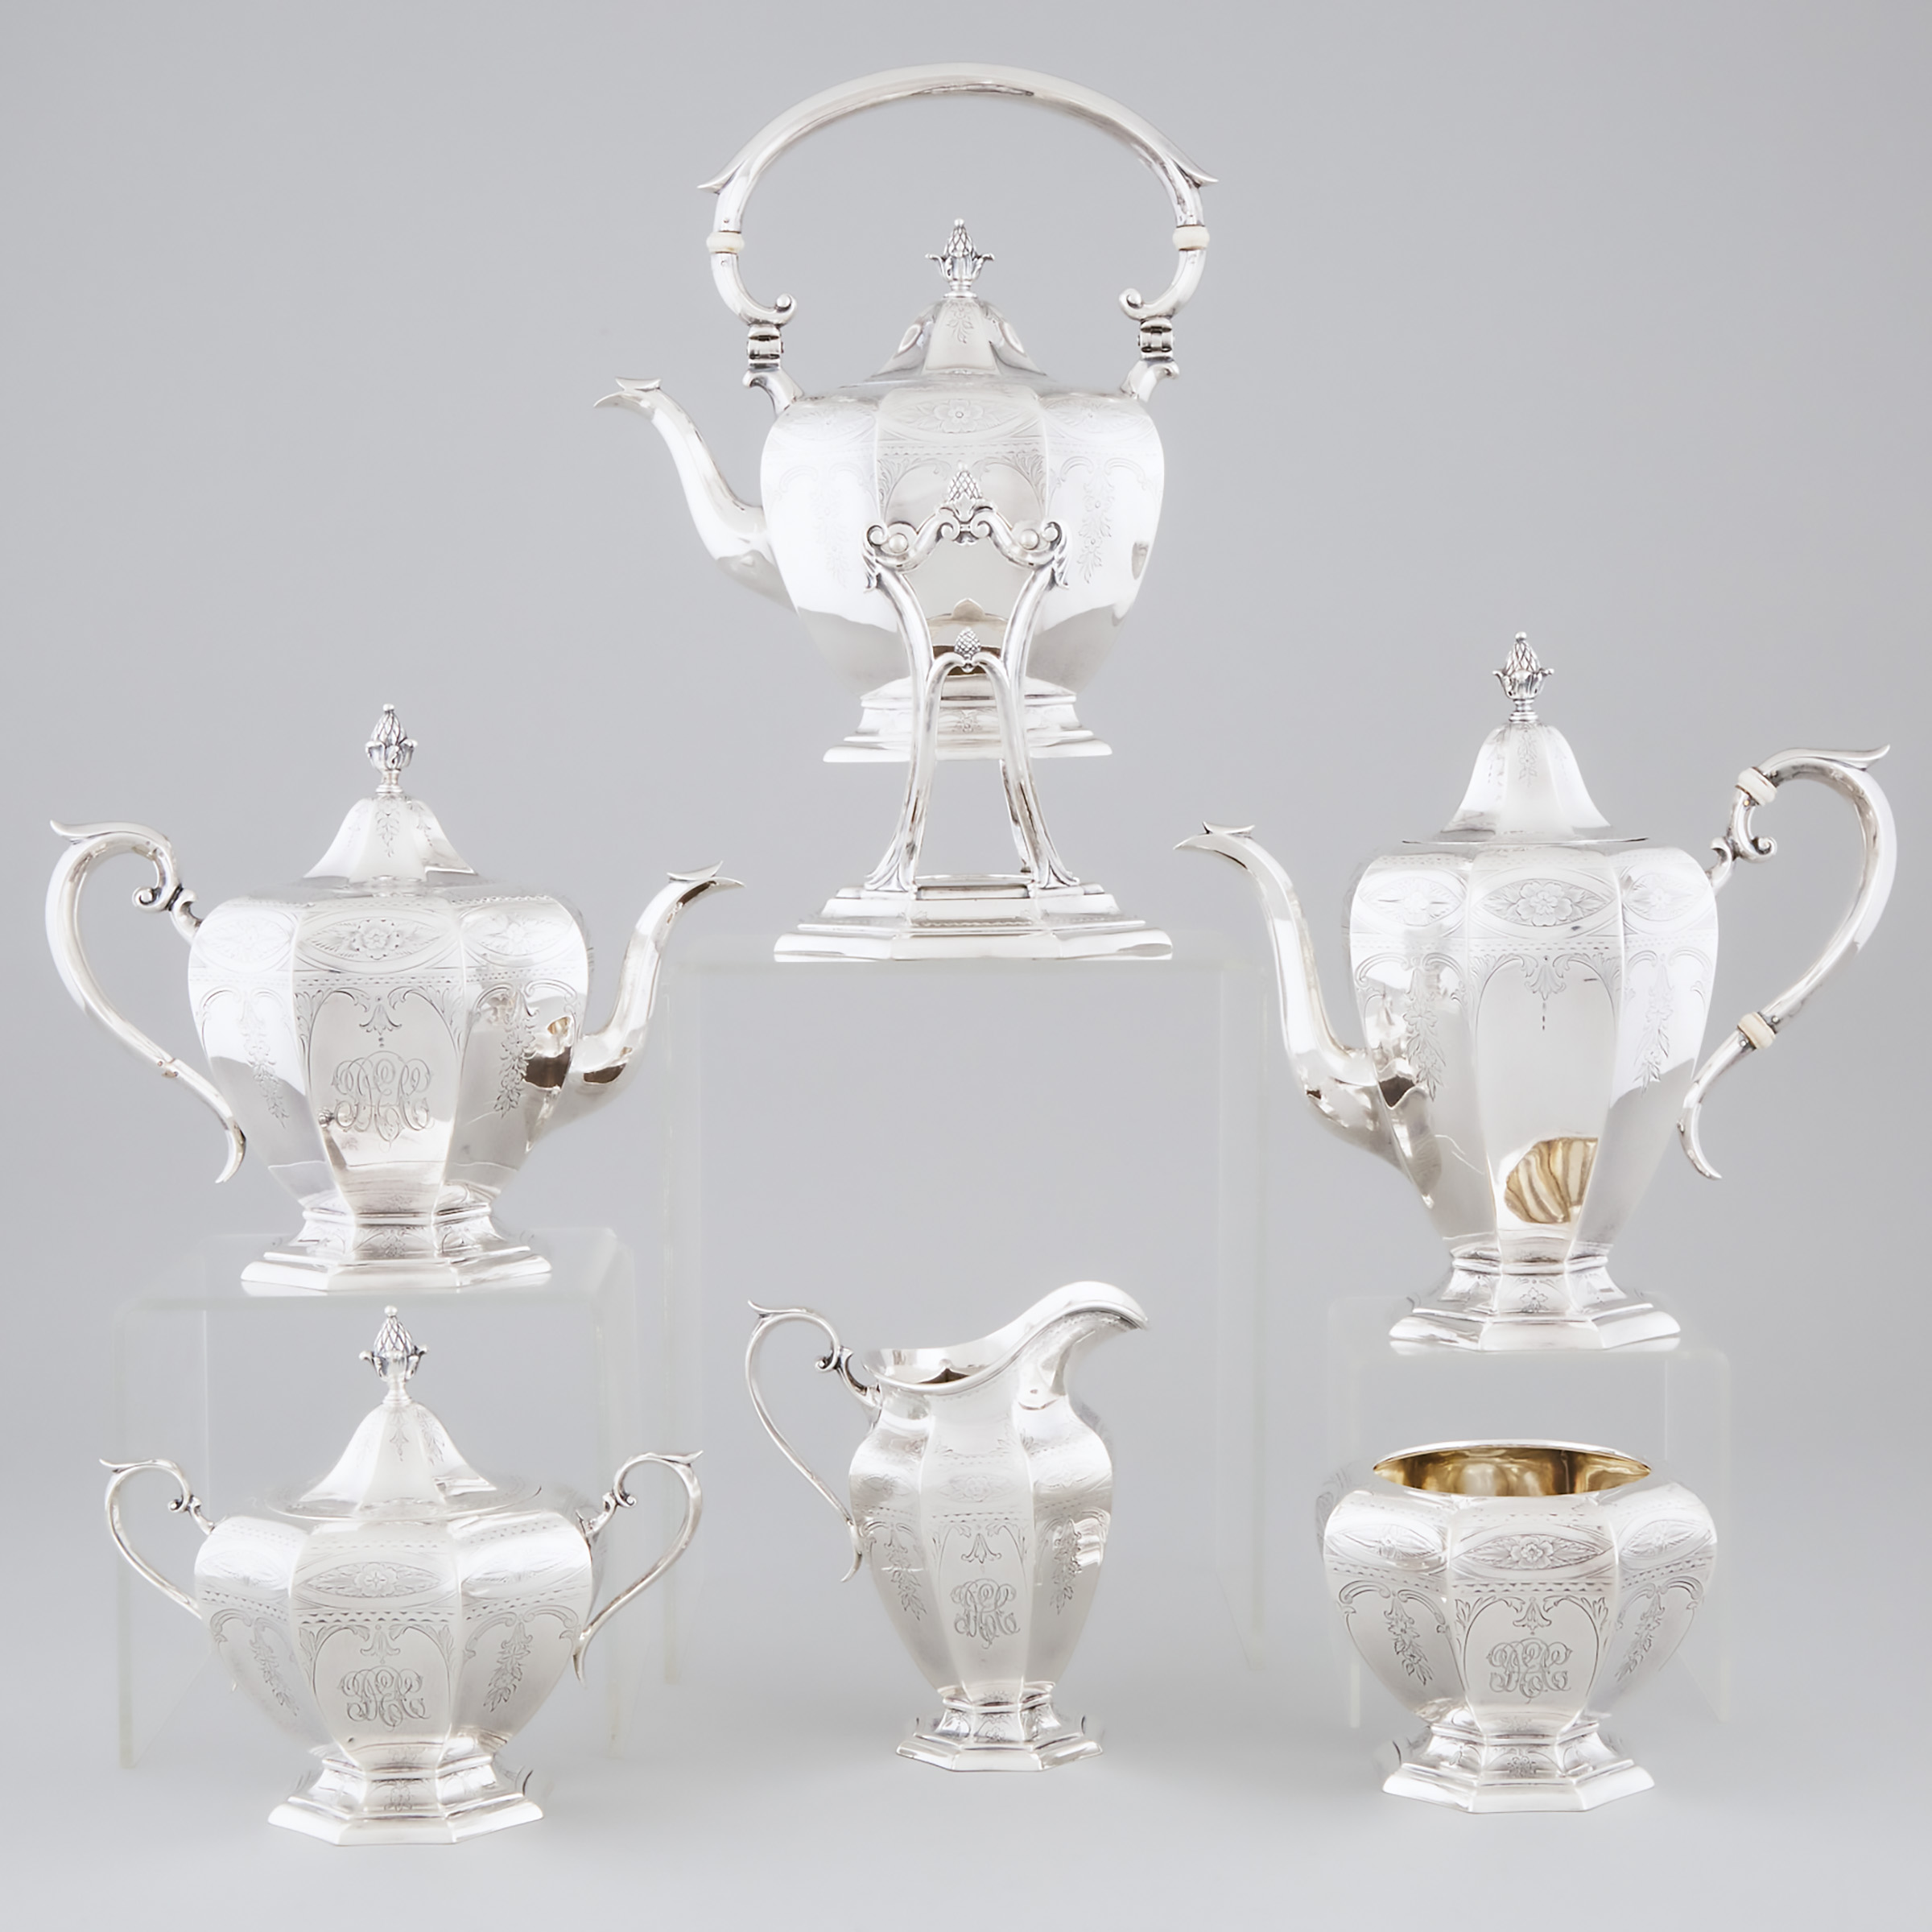 American Silver Tea and Coffee Service, Gorham Mfg. Co., early 20th century